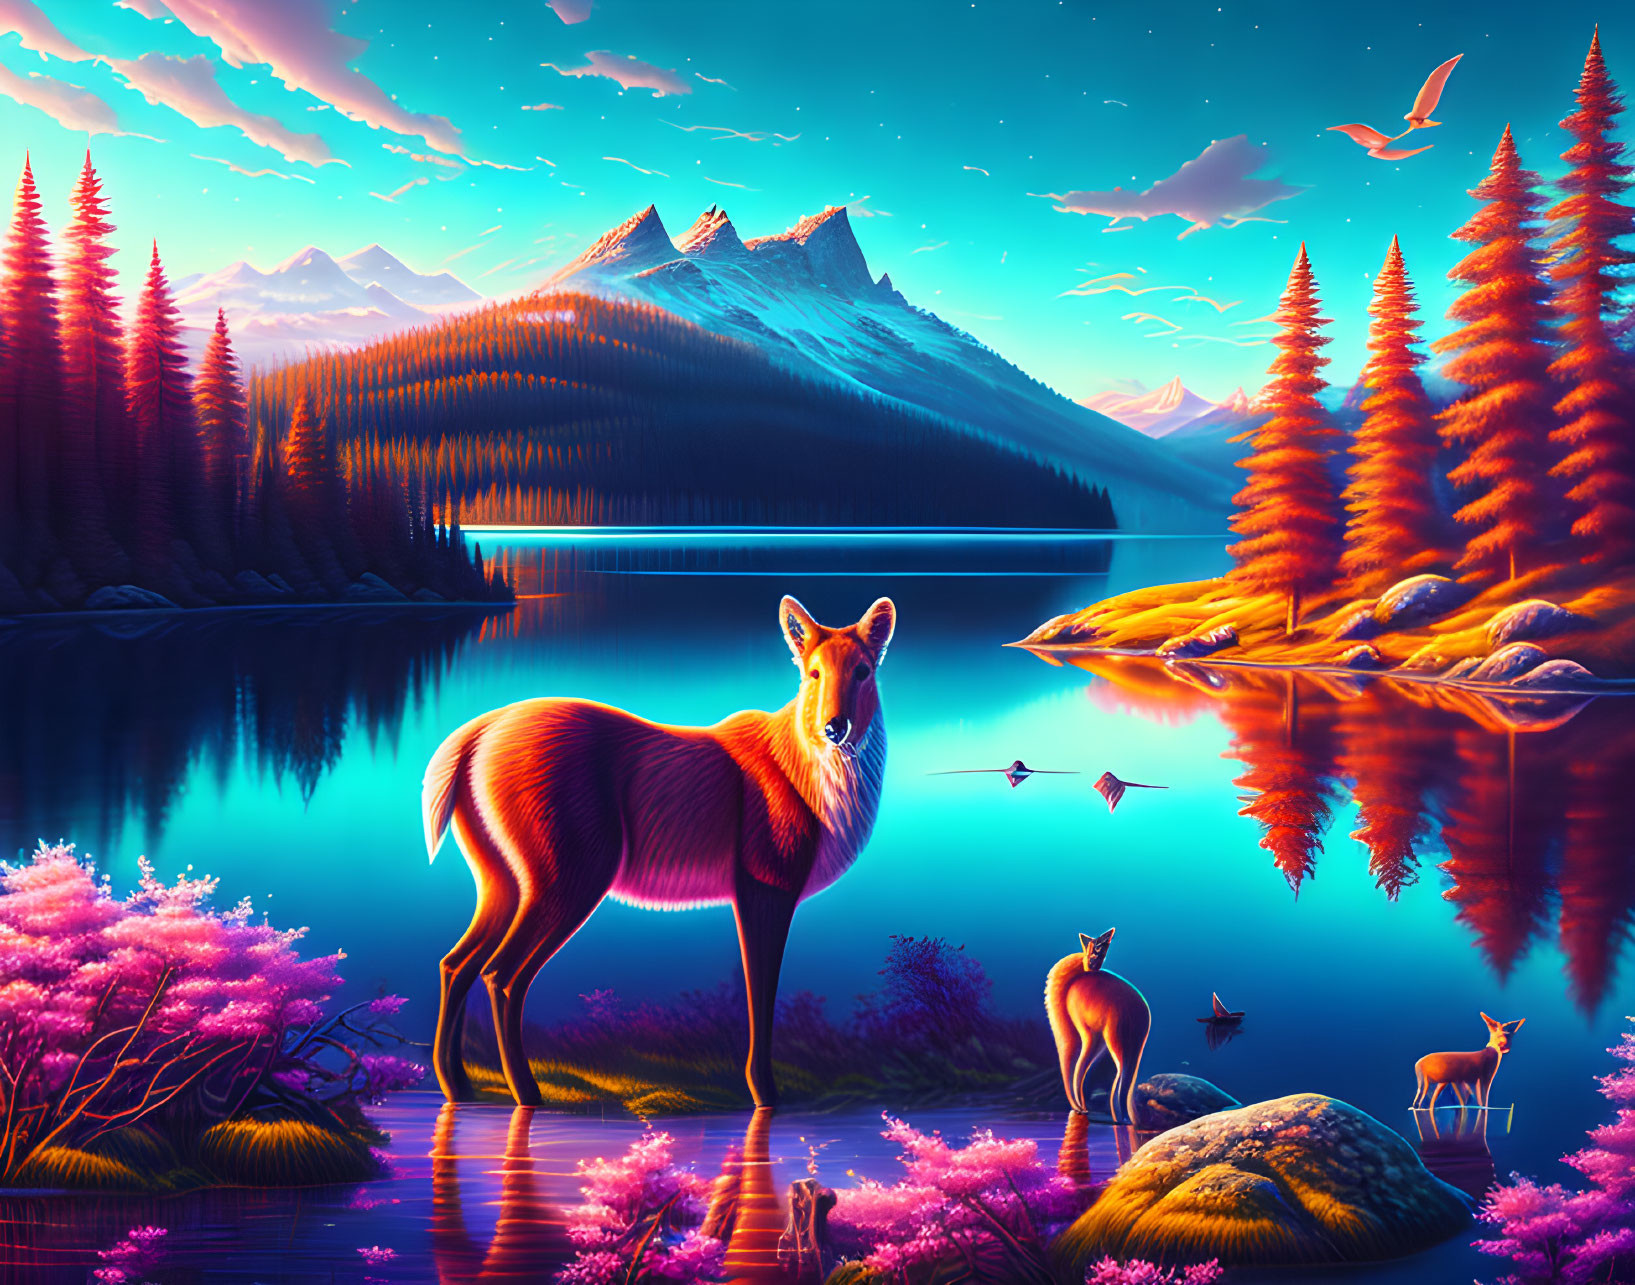 Majestic fox in surreal neon-lit landscape with lake and mountains